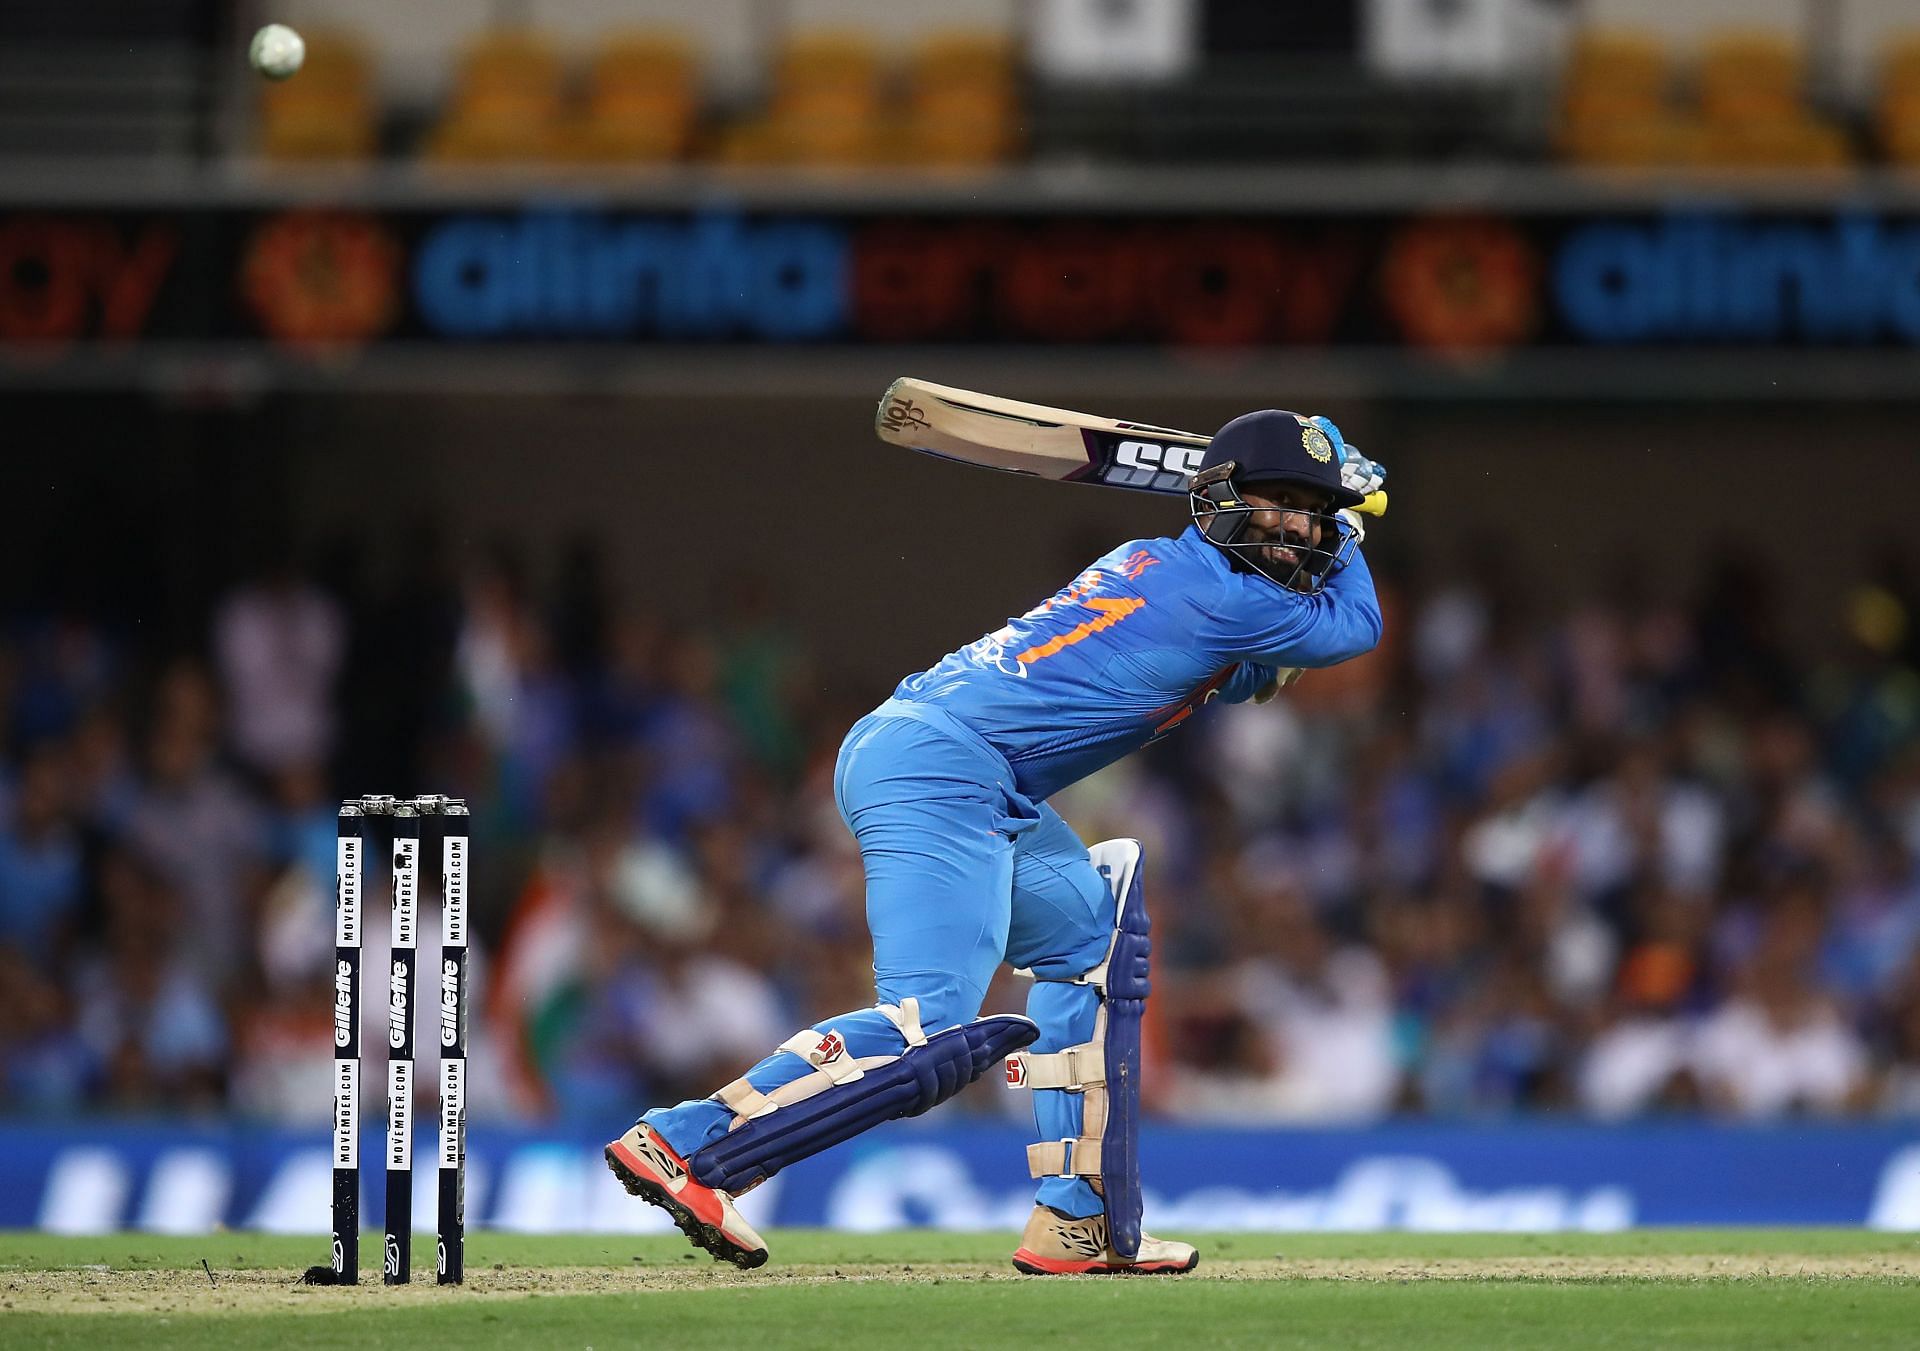 Dinesh Karthik is the most experienced batter for India